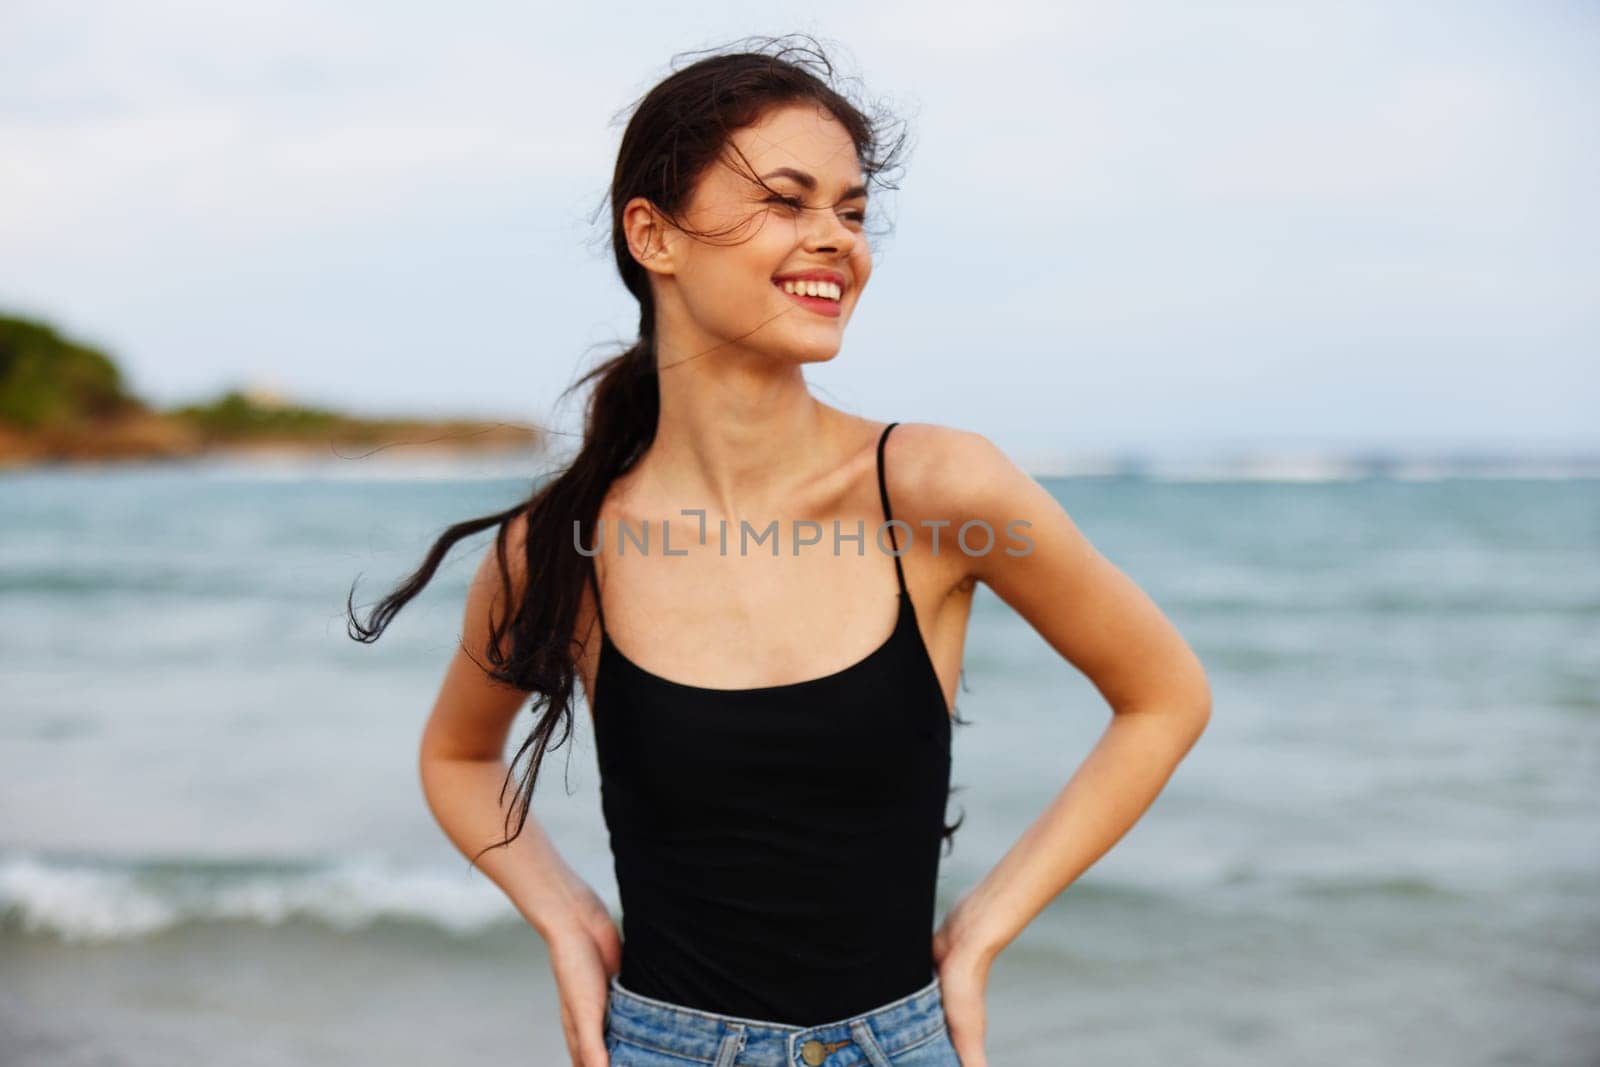 sea woman ocean sunlight beach girl summer travel sky shore smile holiday running sand sunset walking nature relax outdoor lifestyle vacation